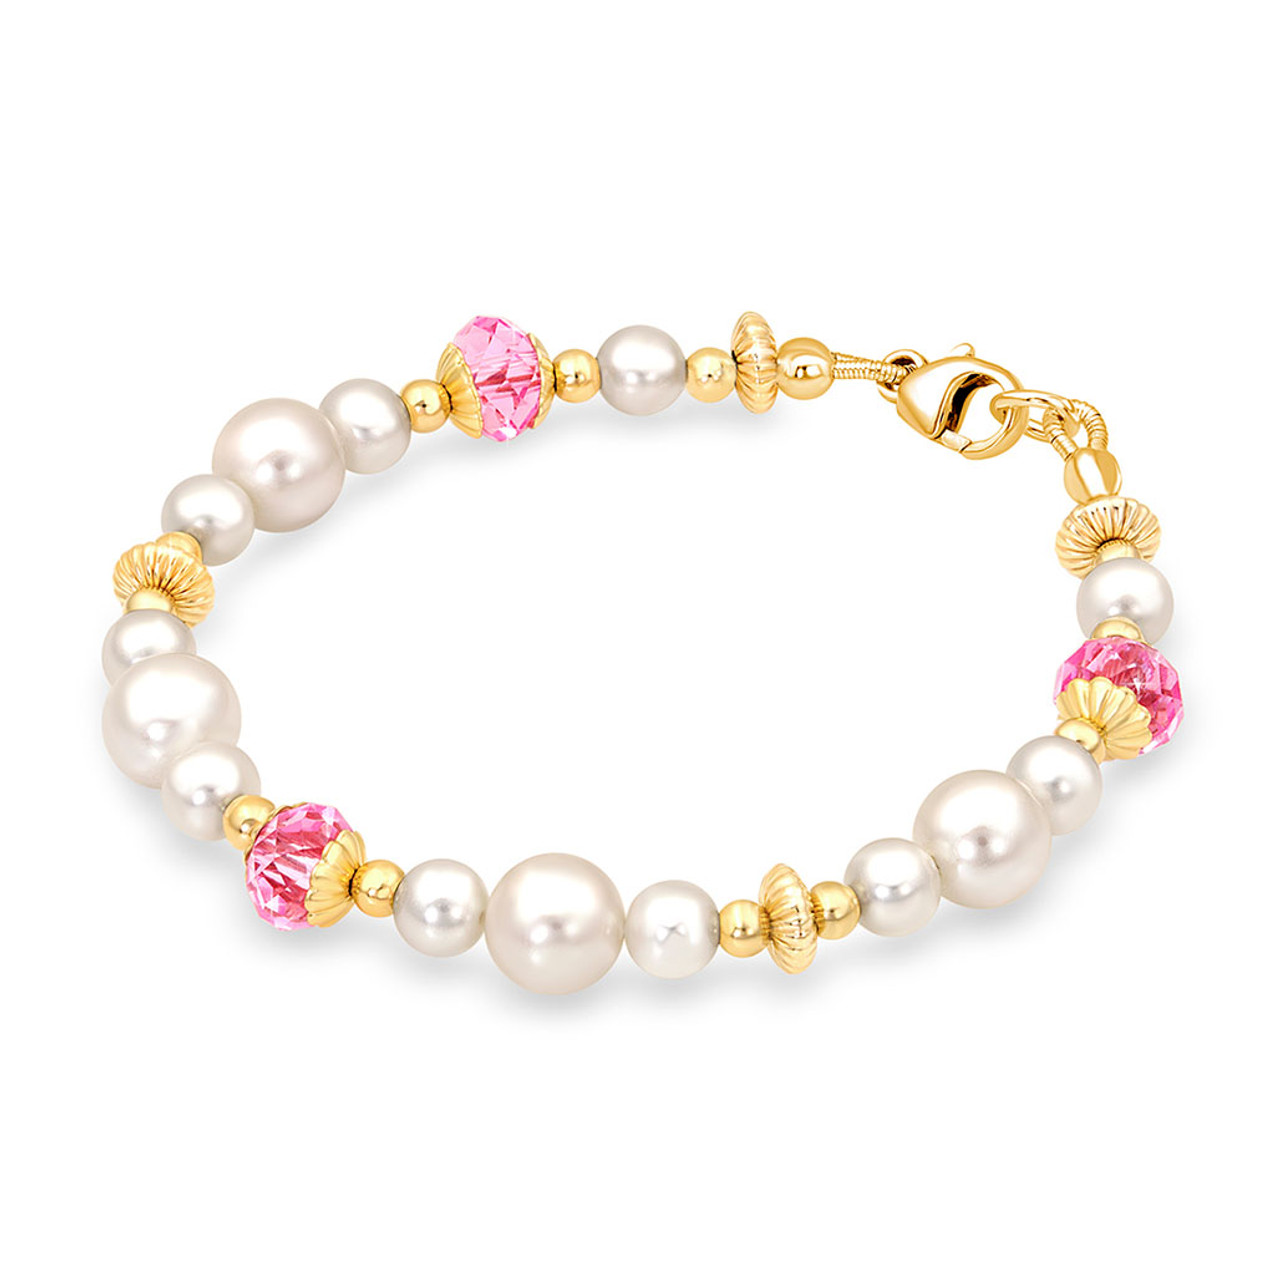 How to Create a Beautiful Cluster Bracelet [Tutorial]